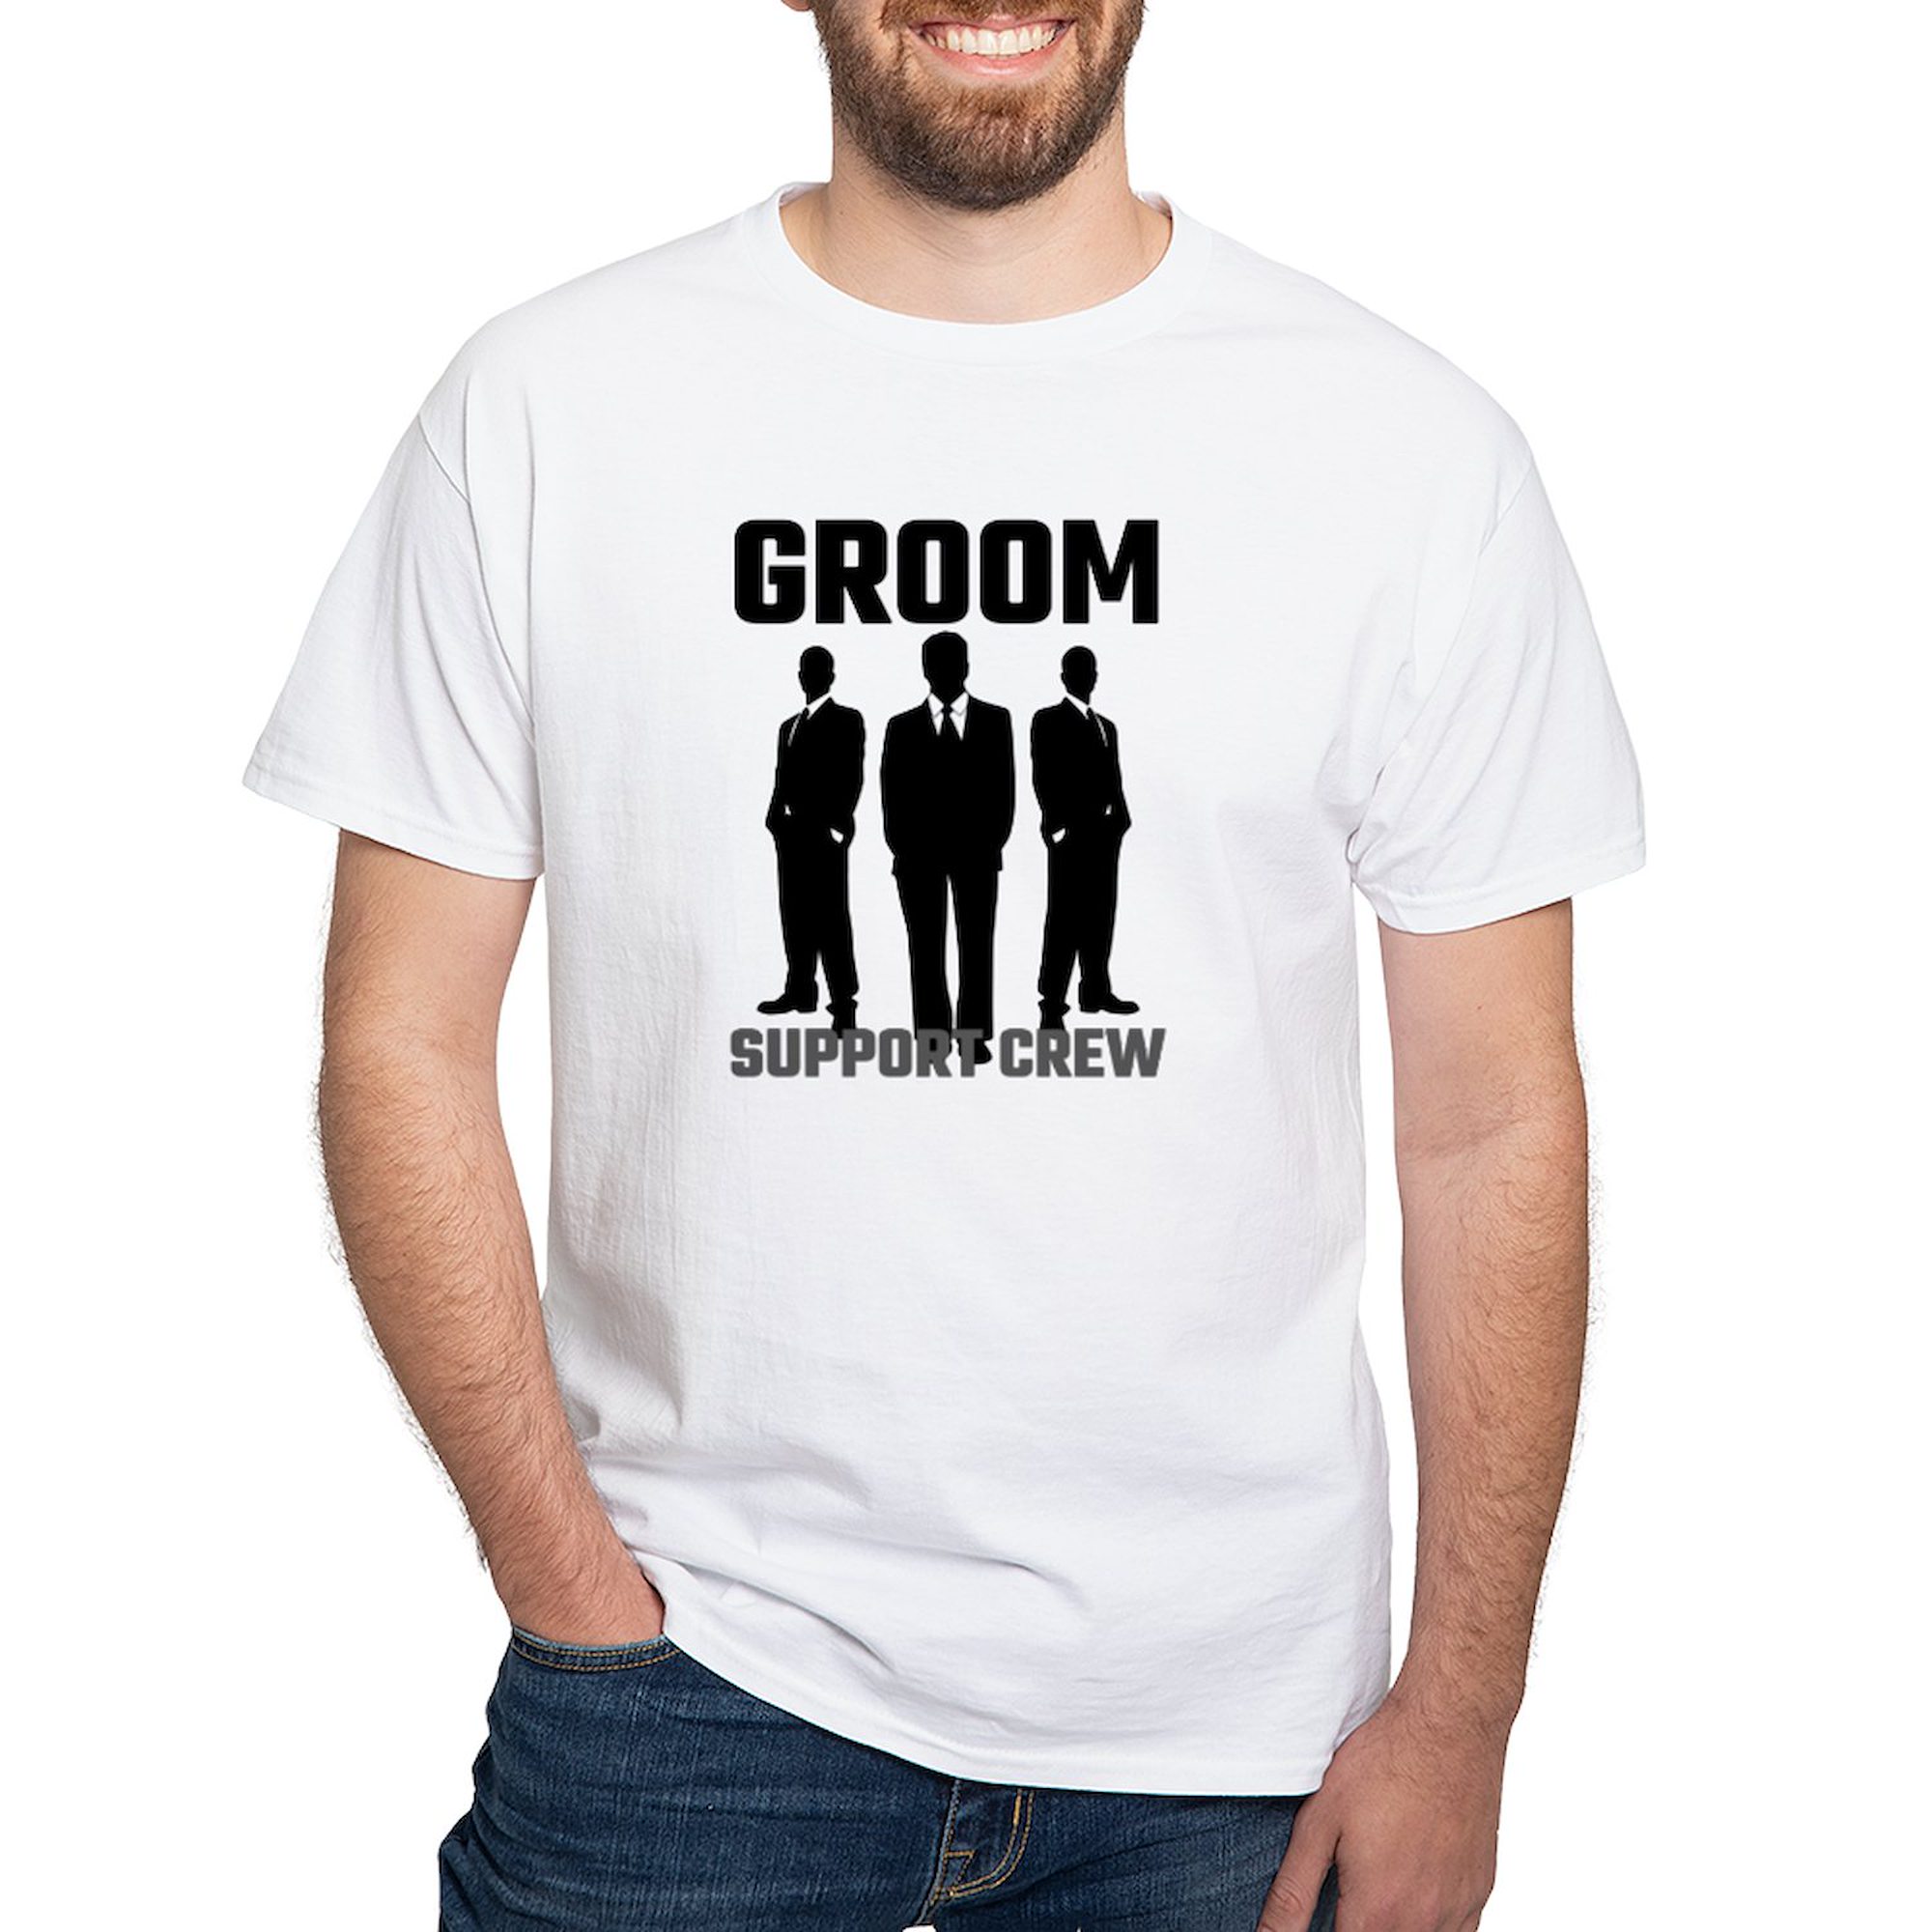 CafePress - Groom Support Crew T Shirt - Men's Classic T-Shirts - image 1 of 4